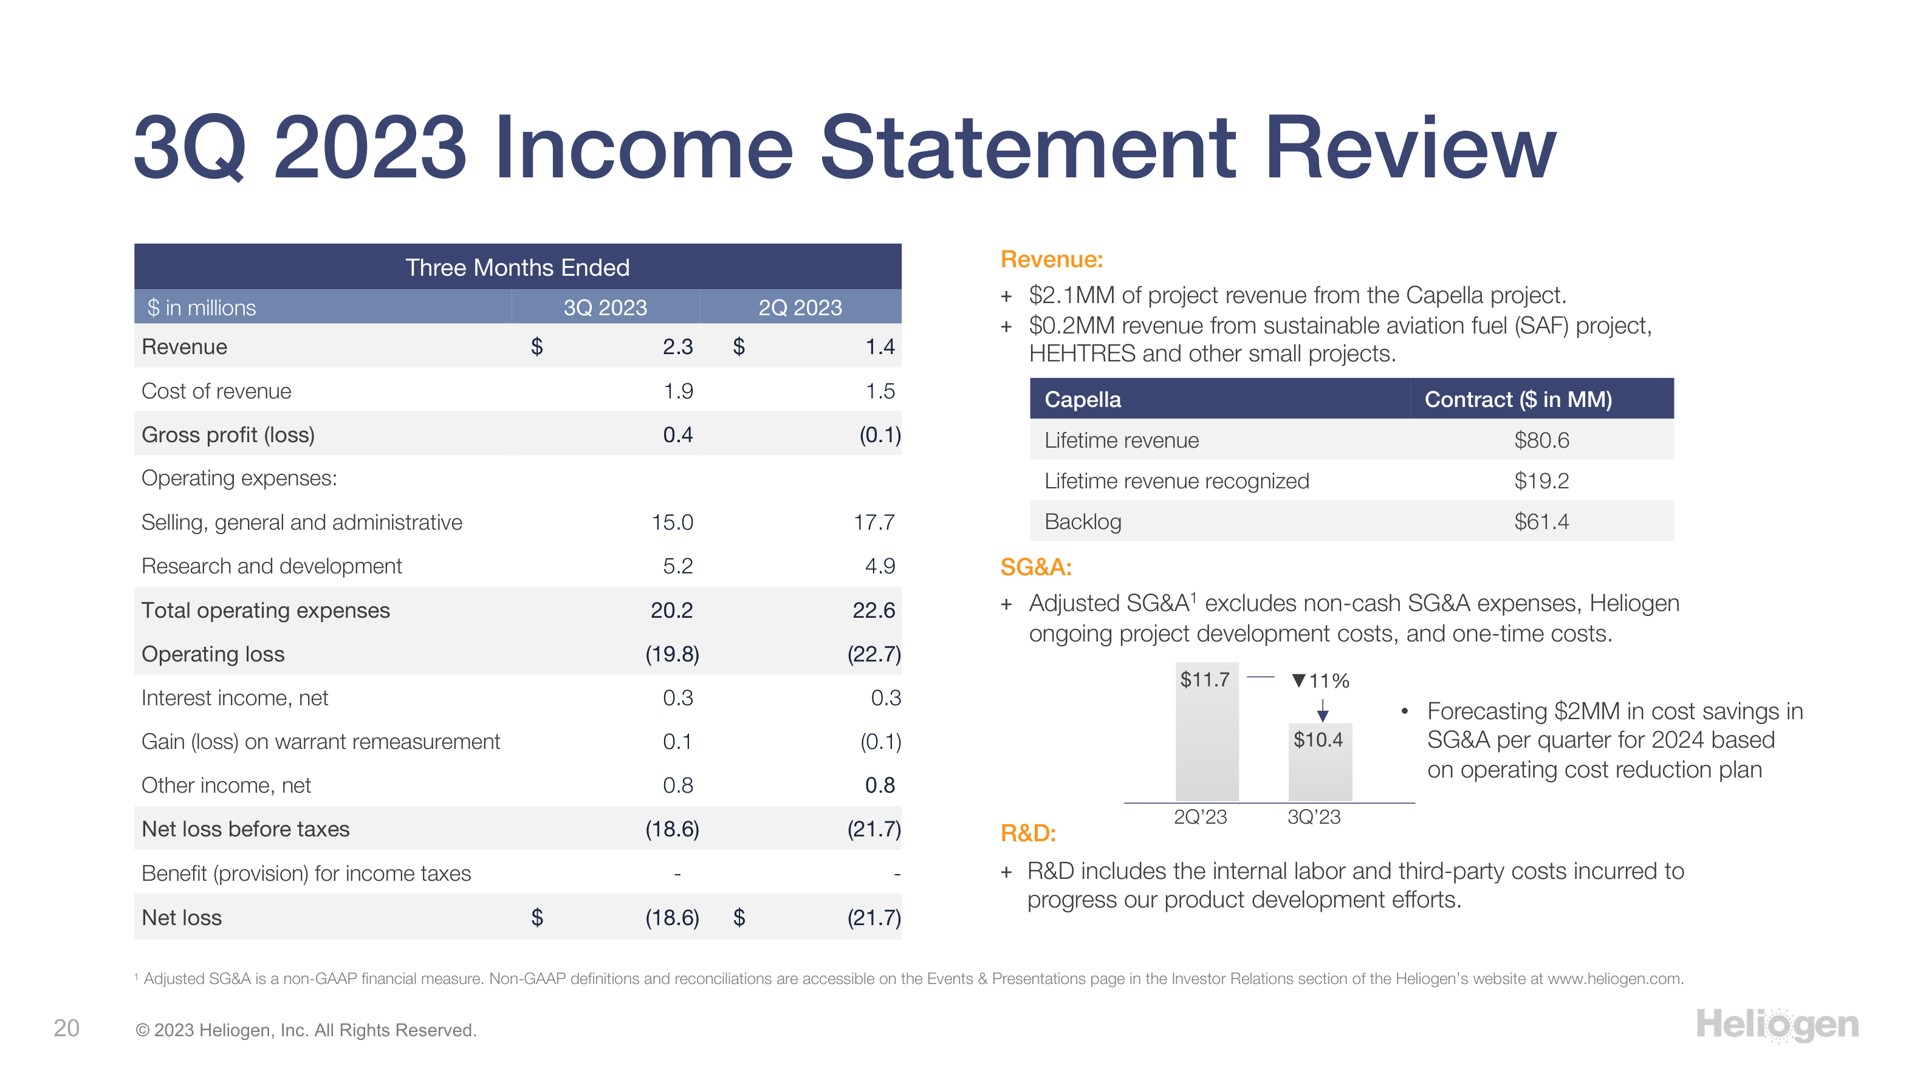 income statement review | Heliogen